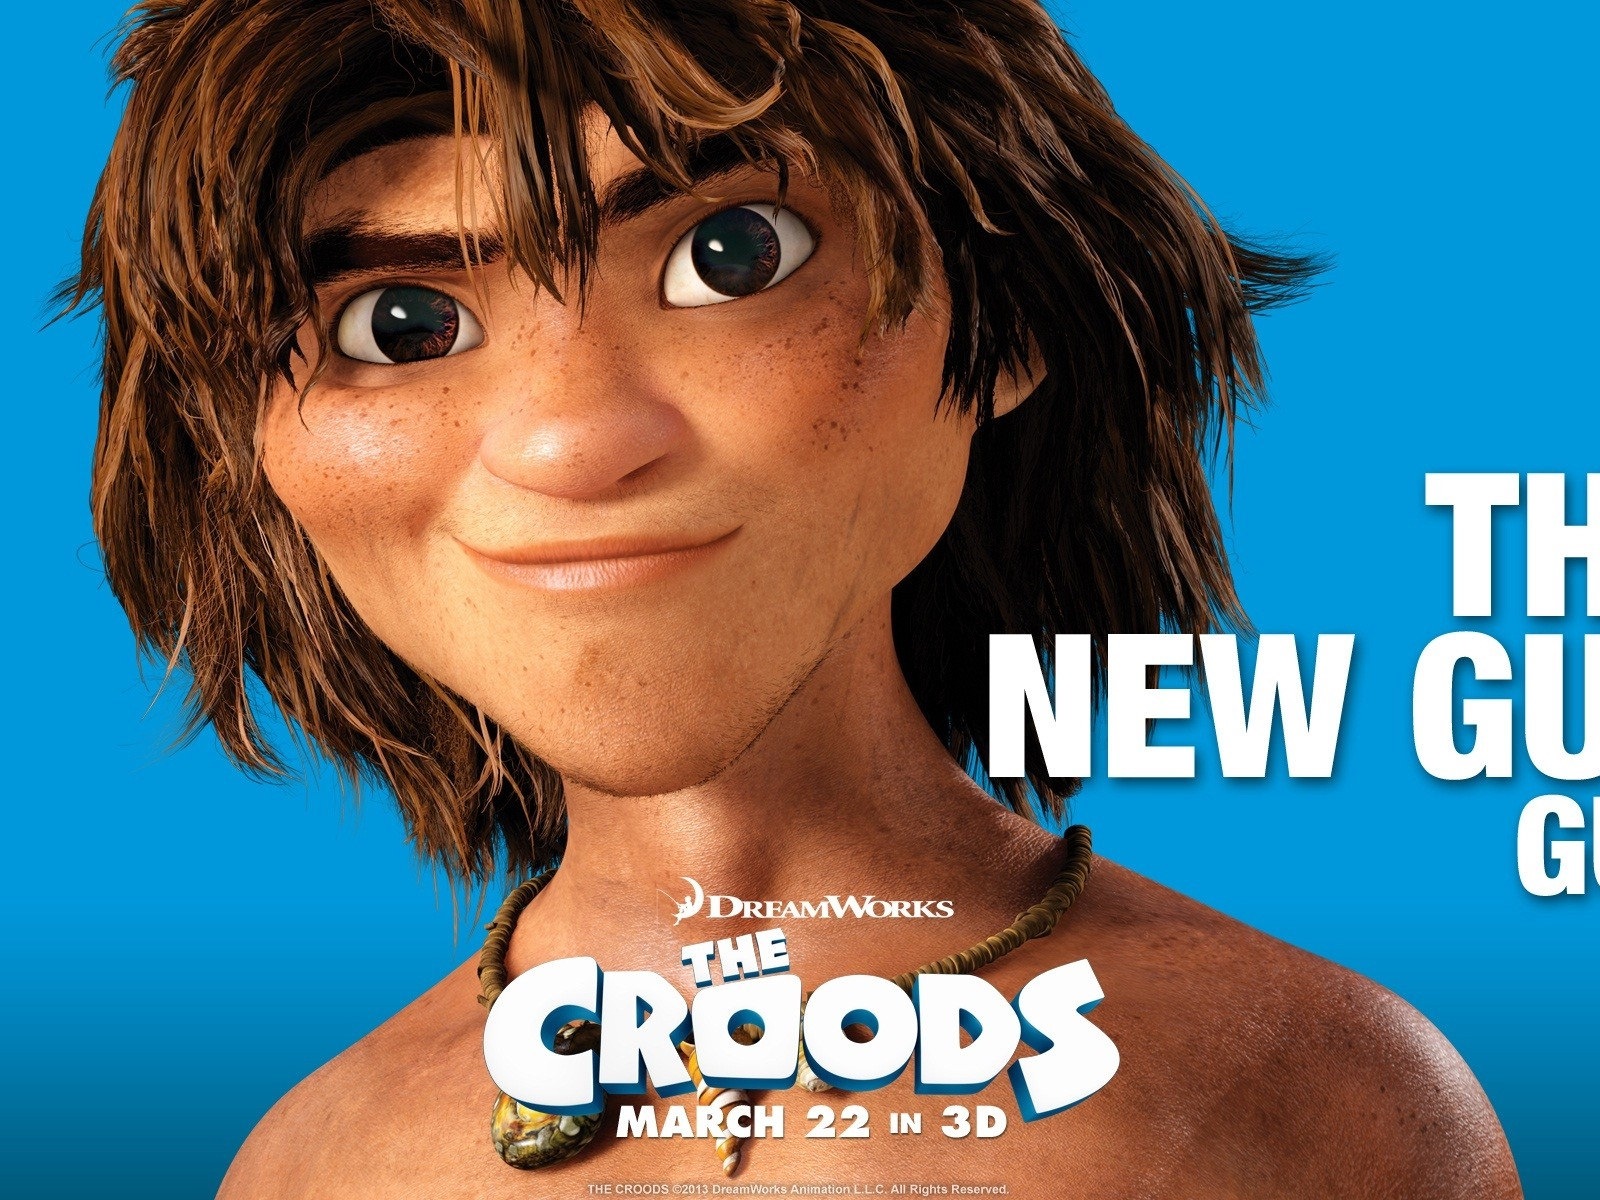 V Croods HD Movie Wallpapers #8 - 1600x1200